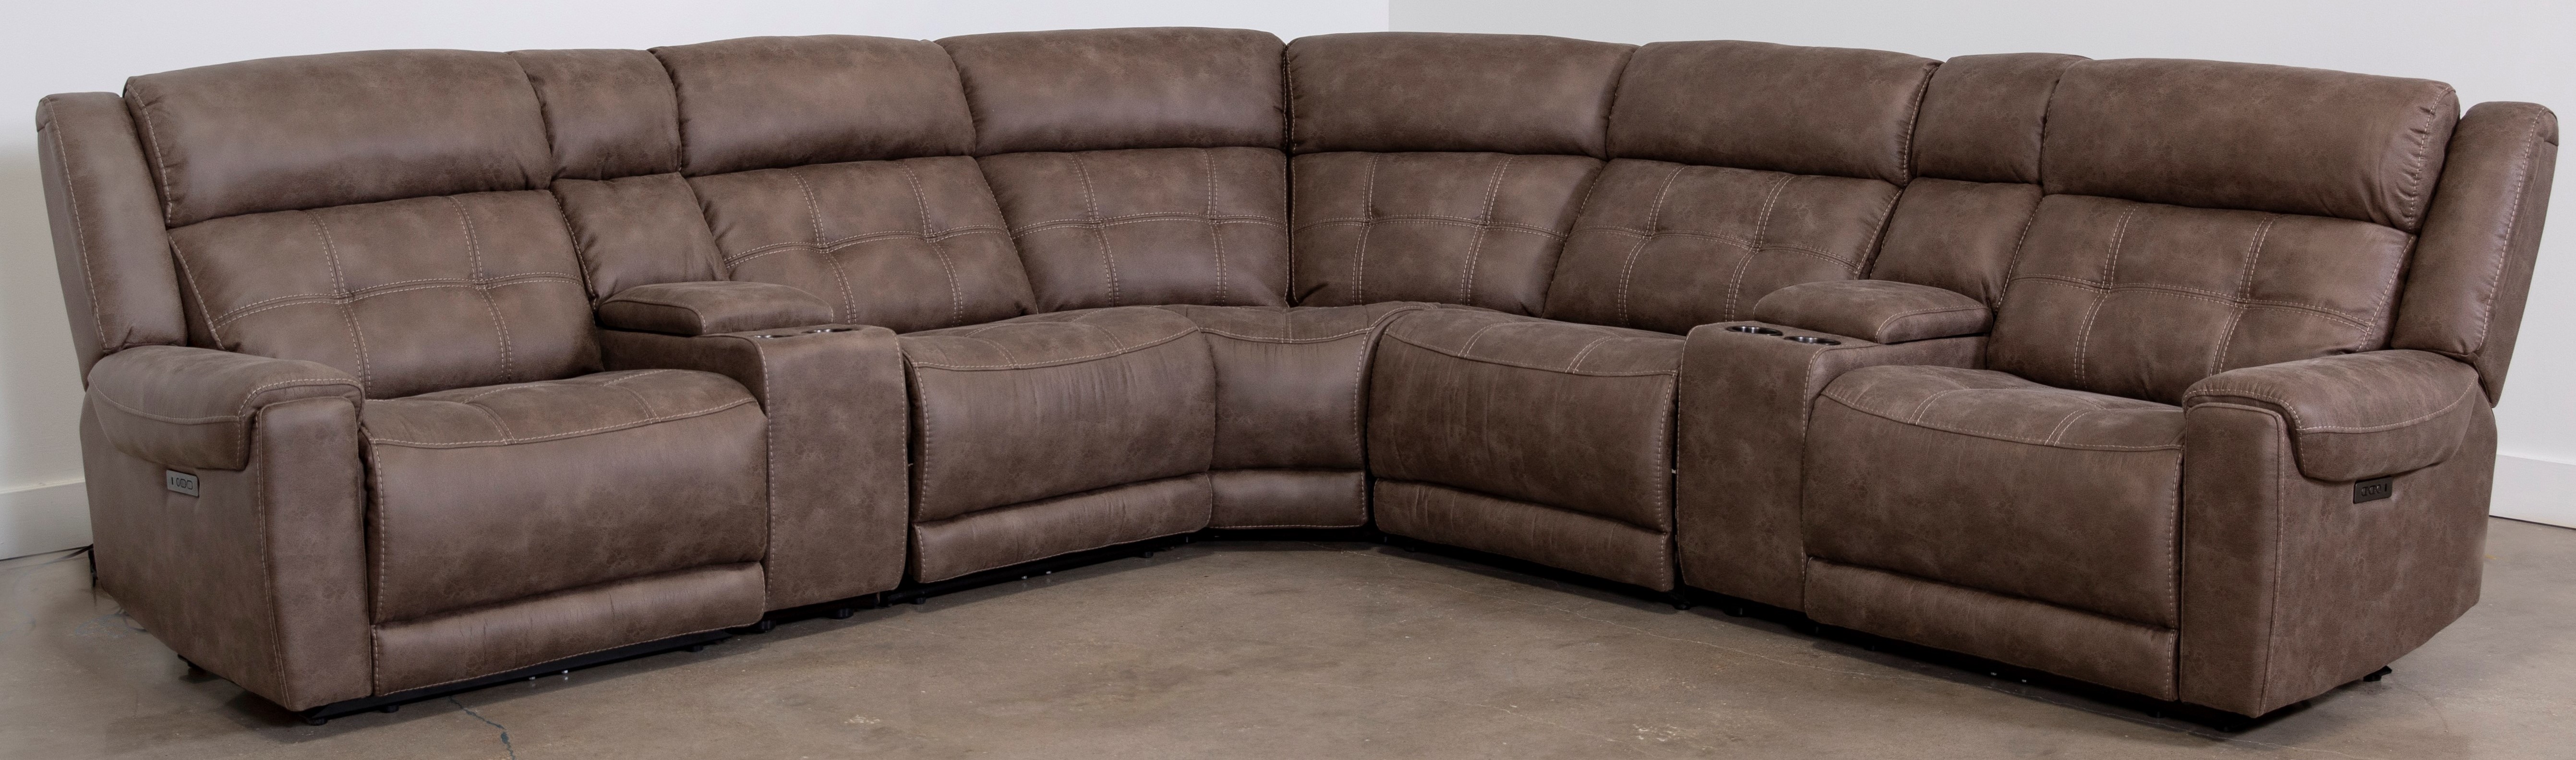 Man Wah Brown 7 Piece Taupe Power Reclining Sectional